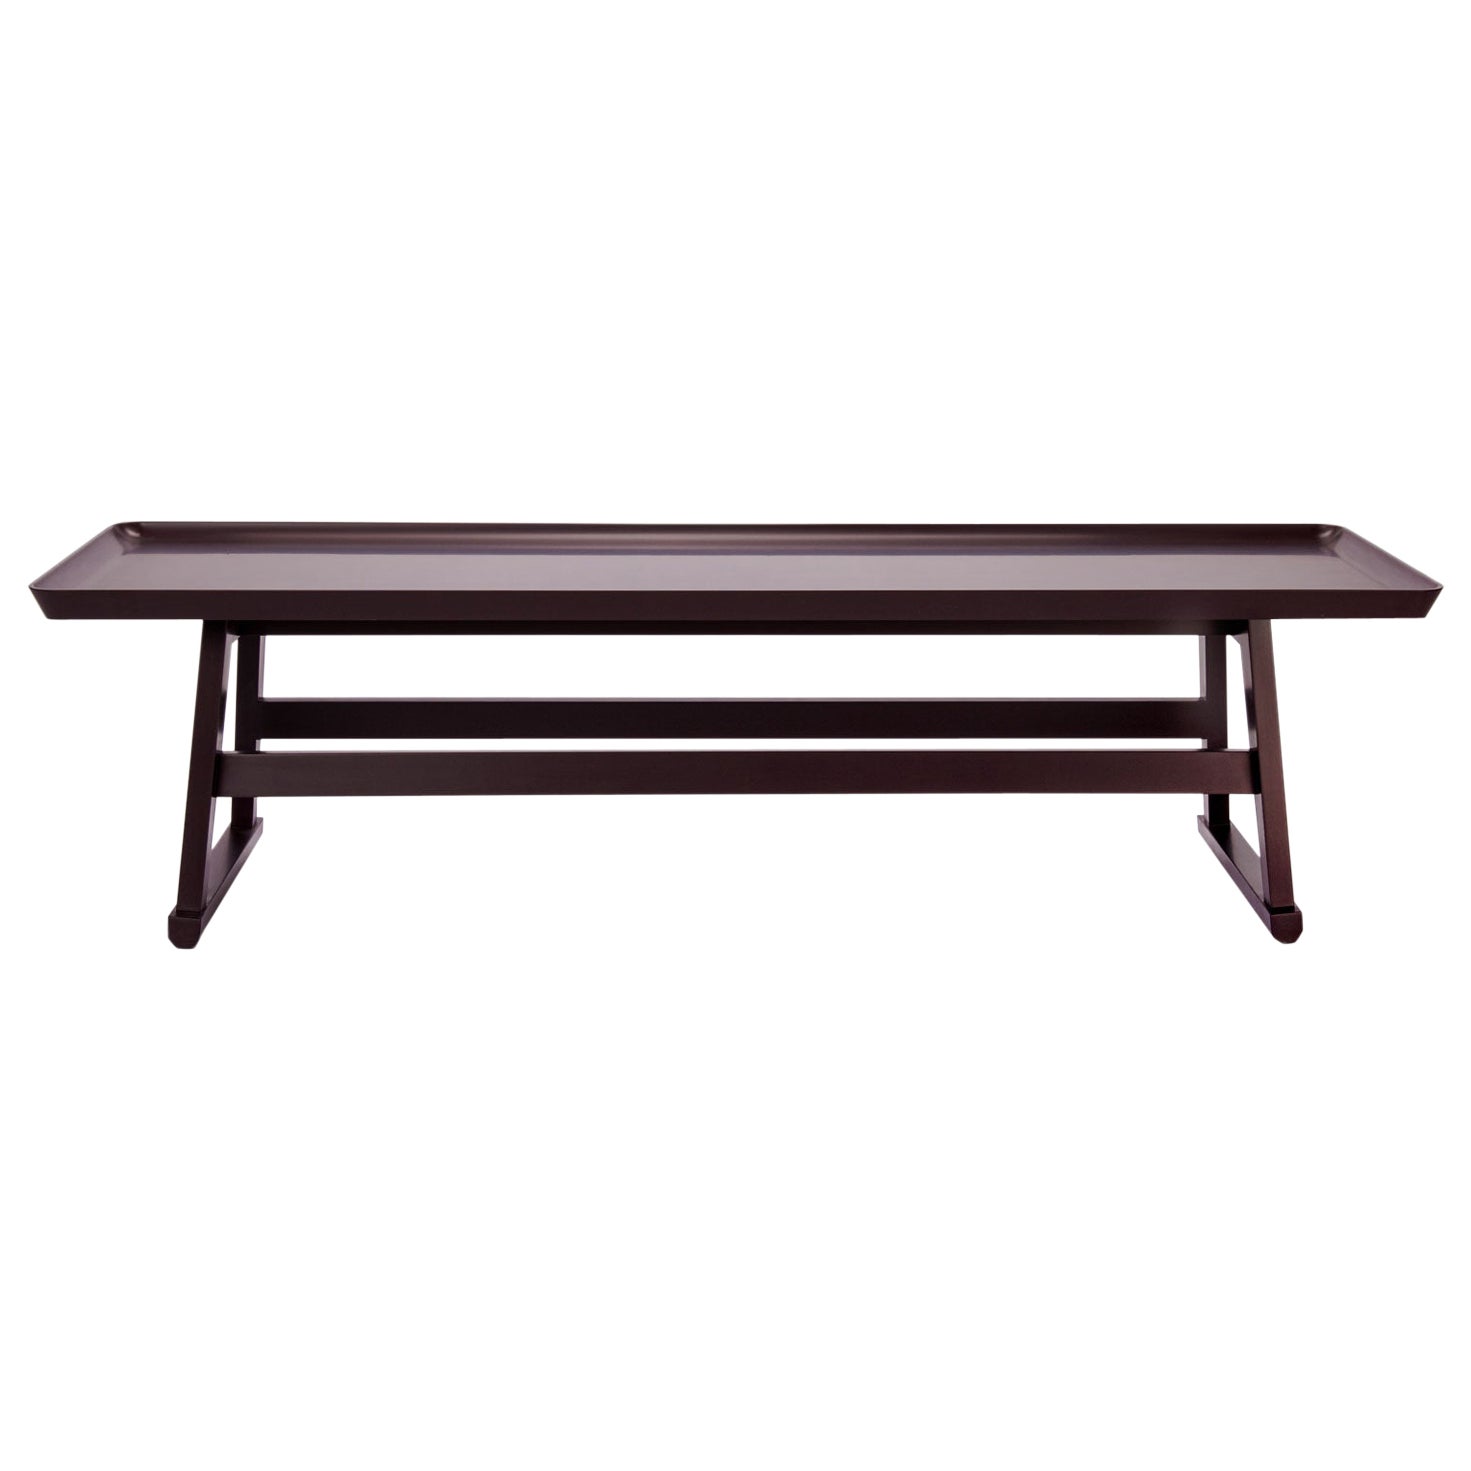 Dark Plum Shellac Rectangular Wood Coffee Table by B&B Italia - Available Now For Sale